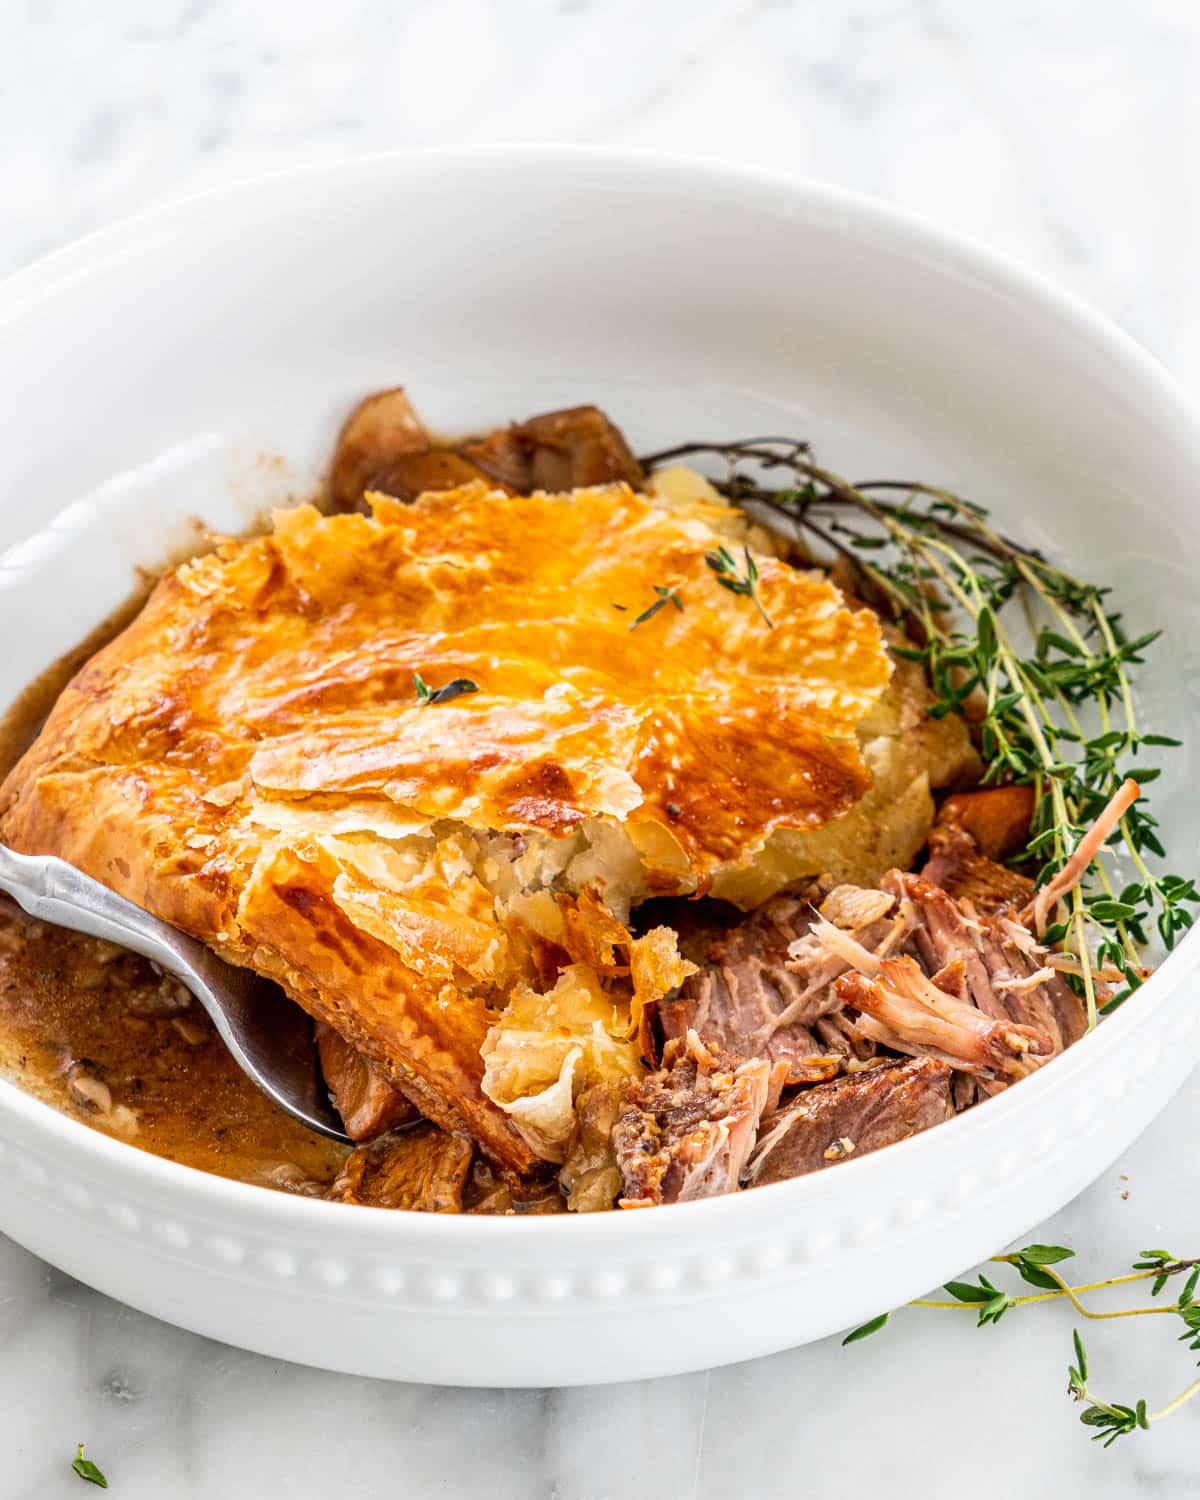 Steak and Mushroom Pie in a white bowl garnished with thyme